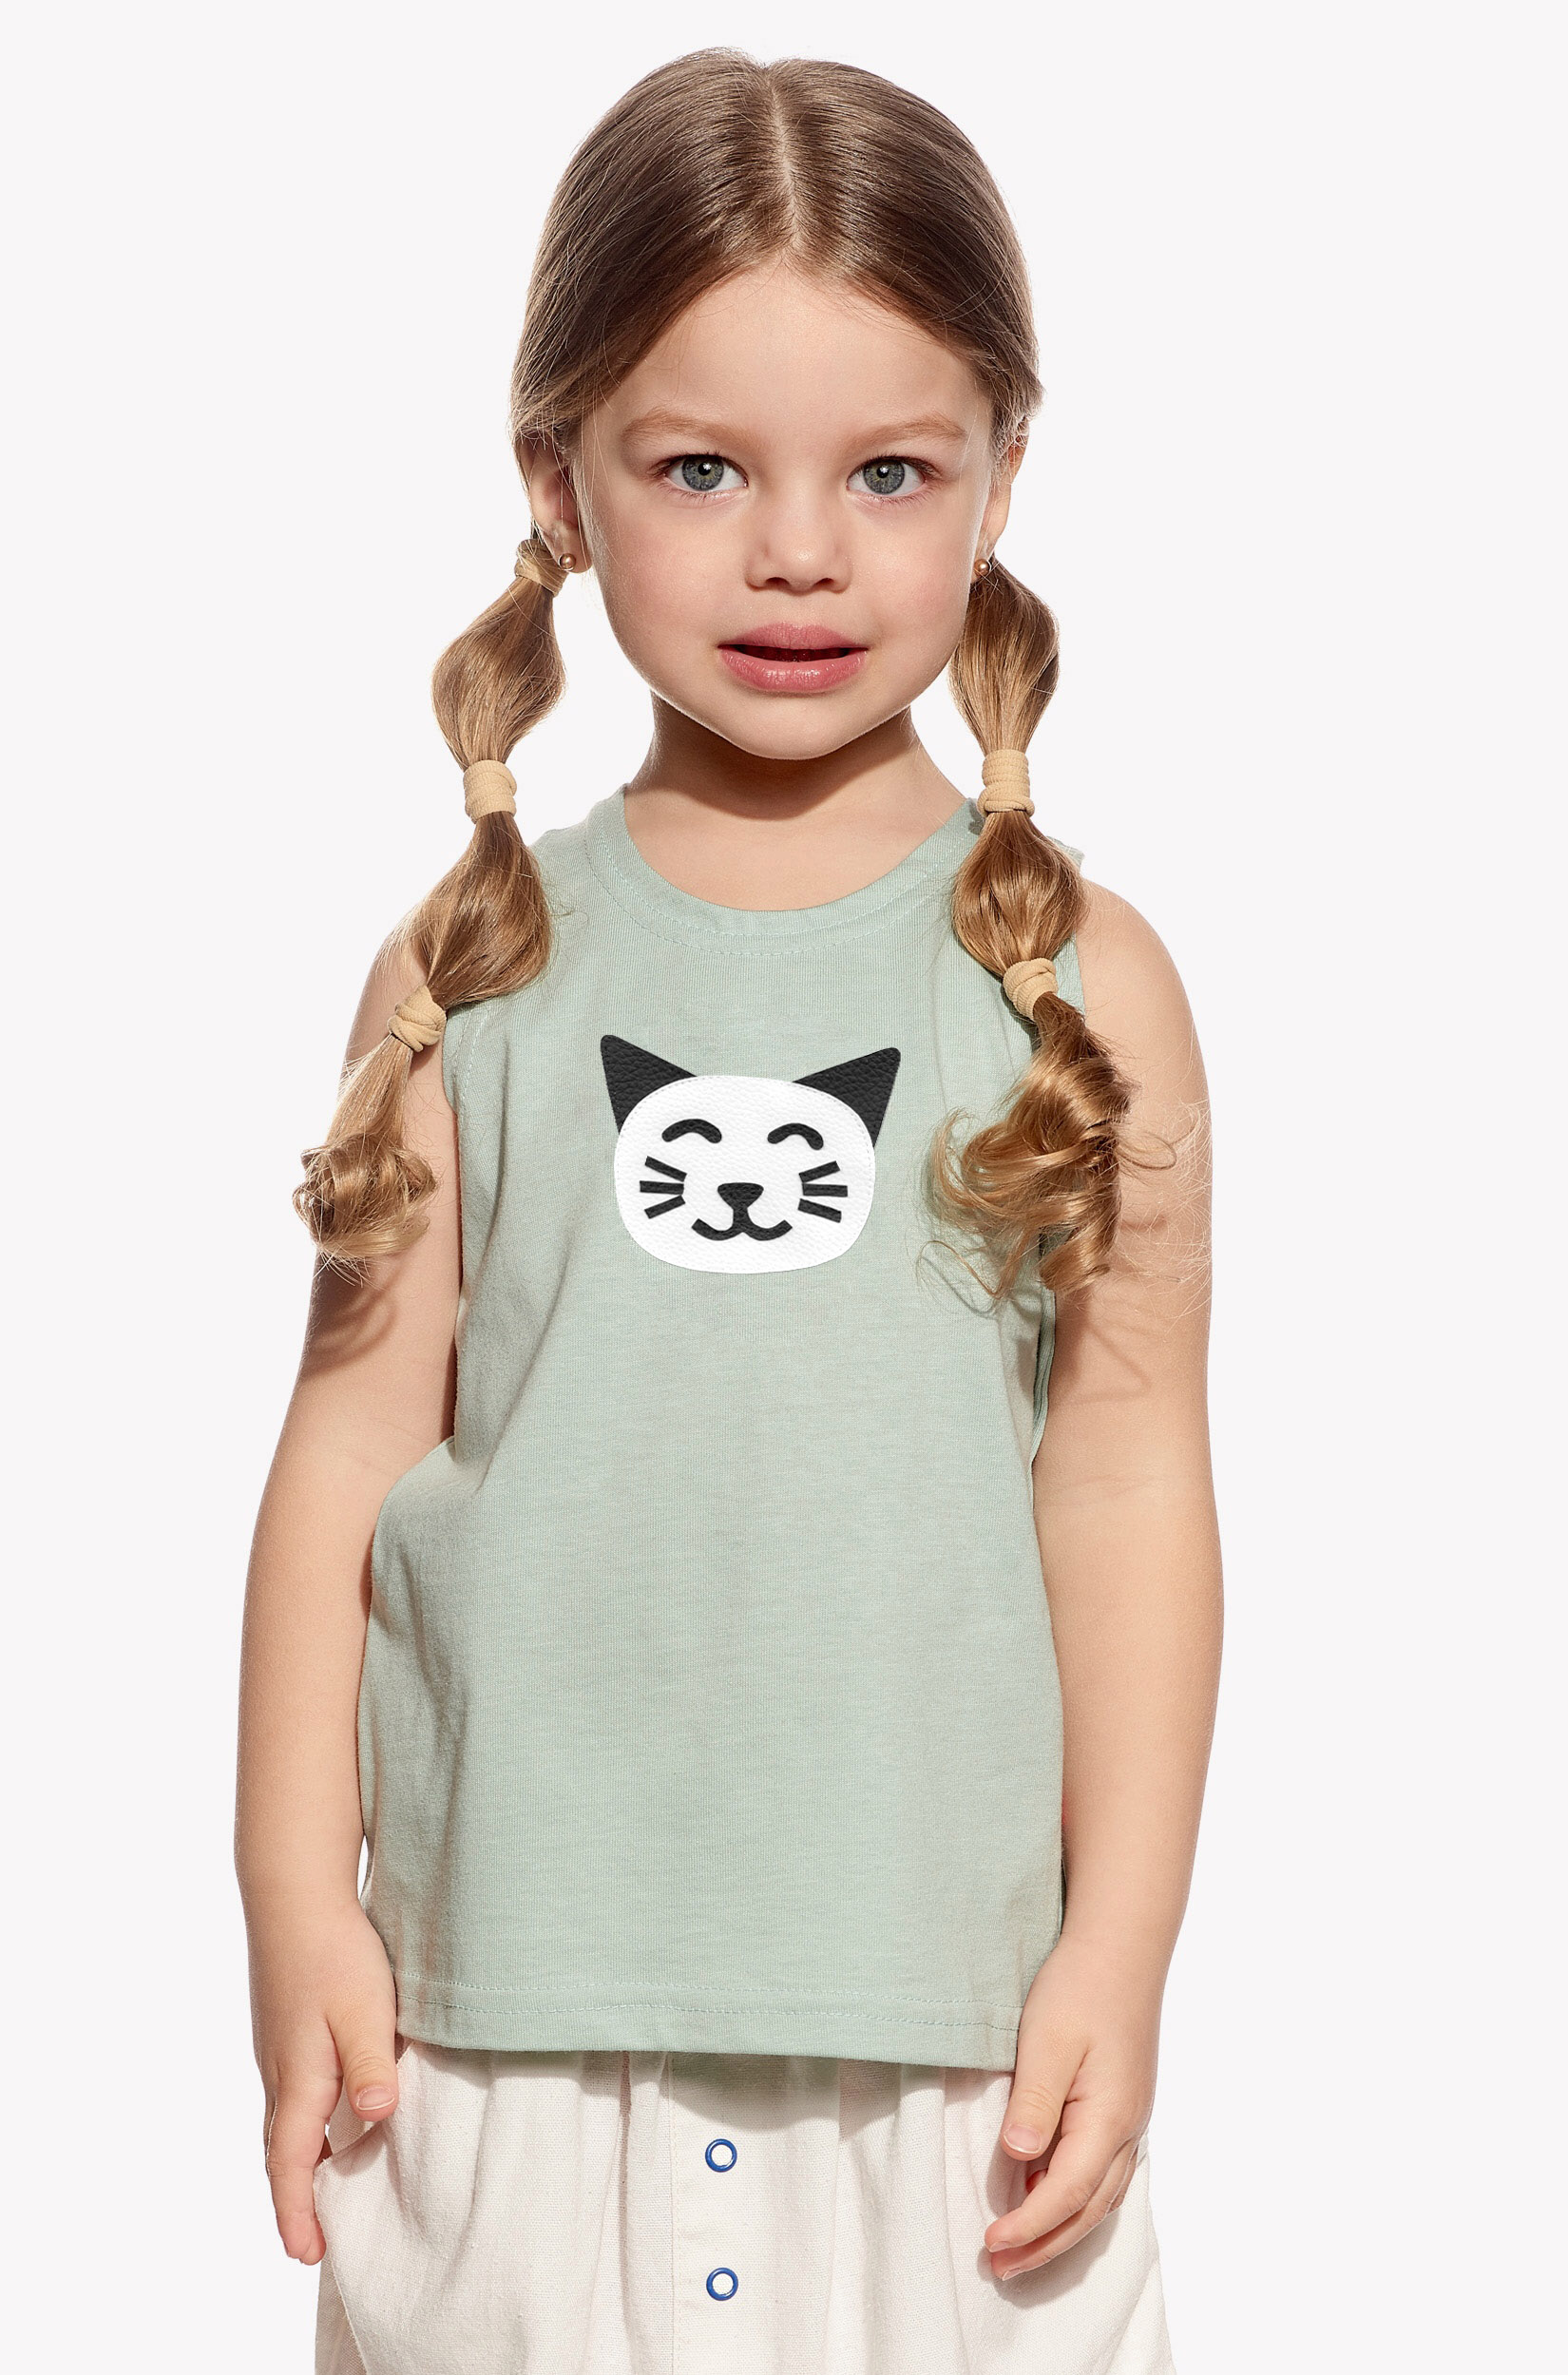 Singlet with cat